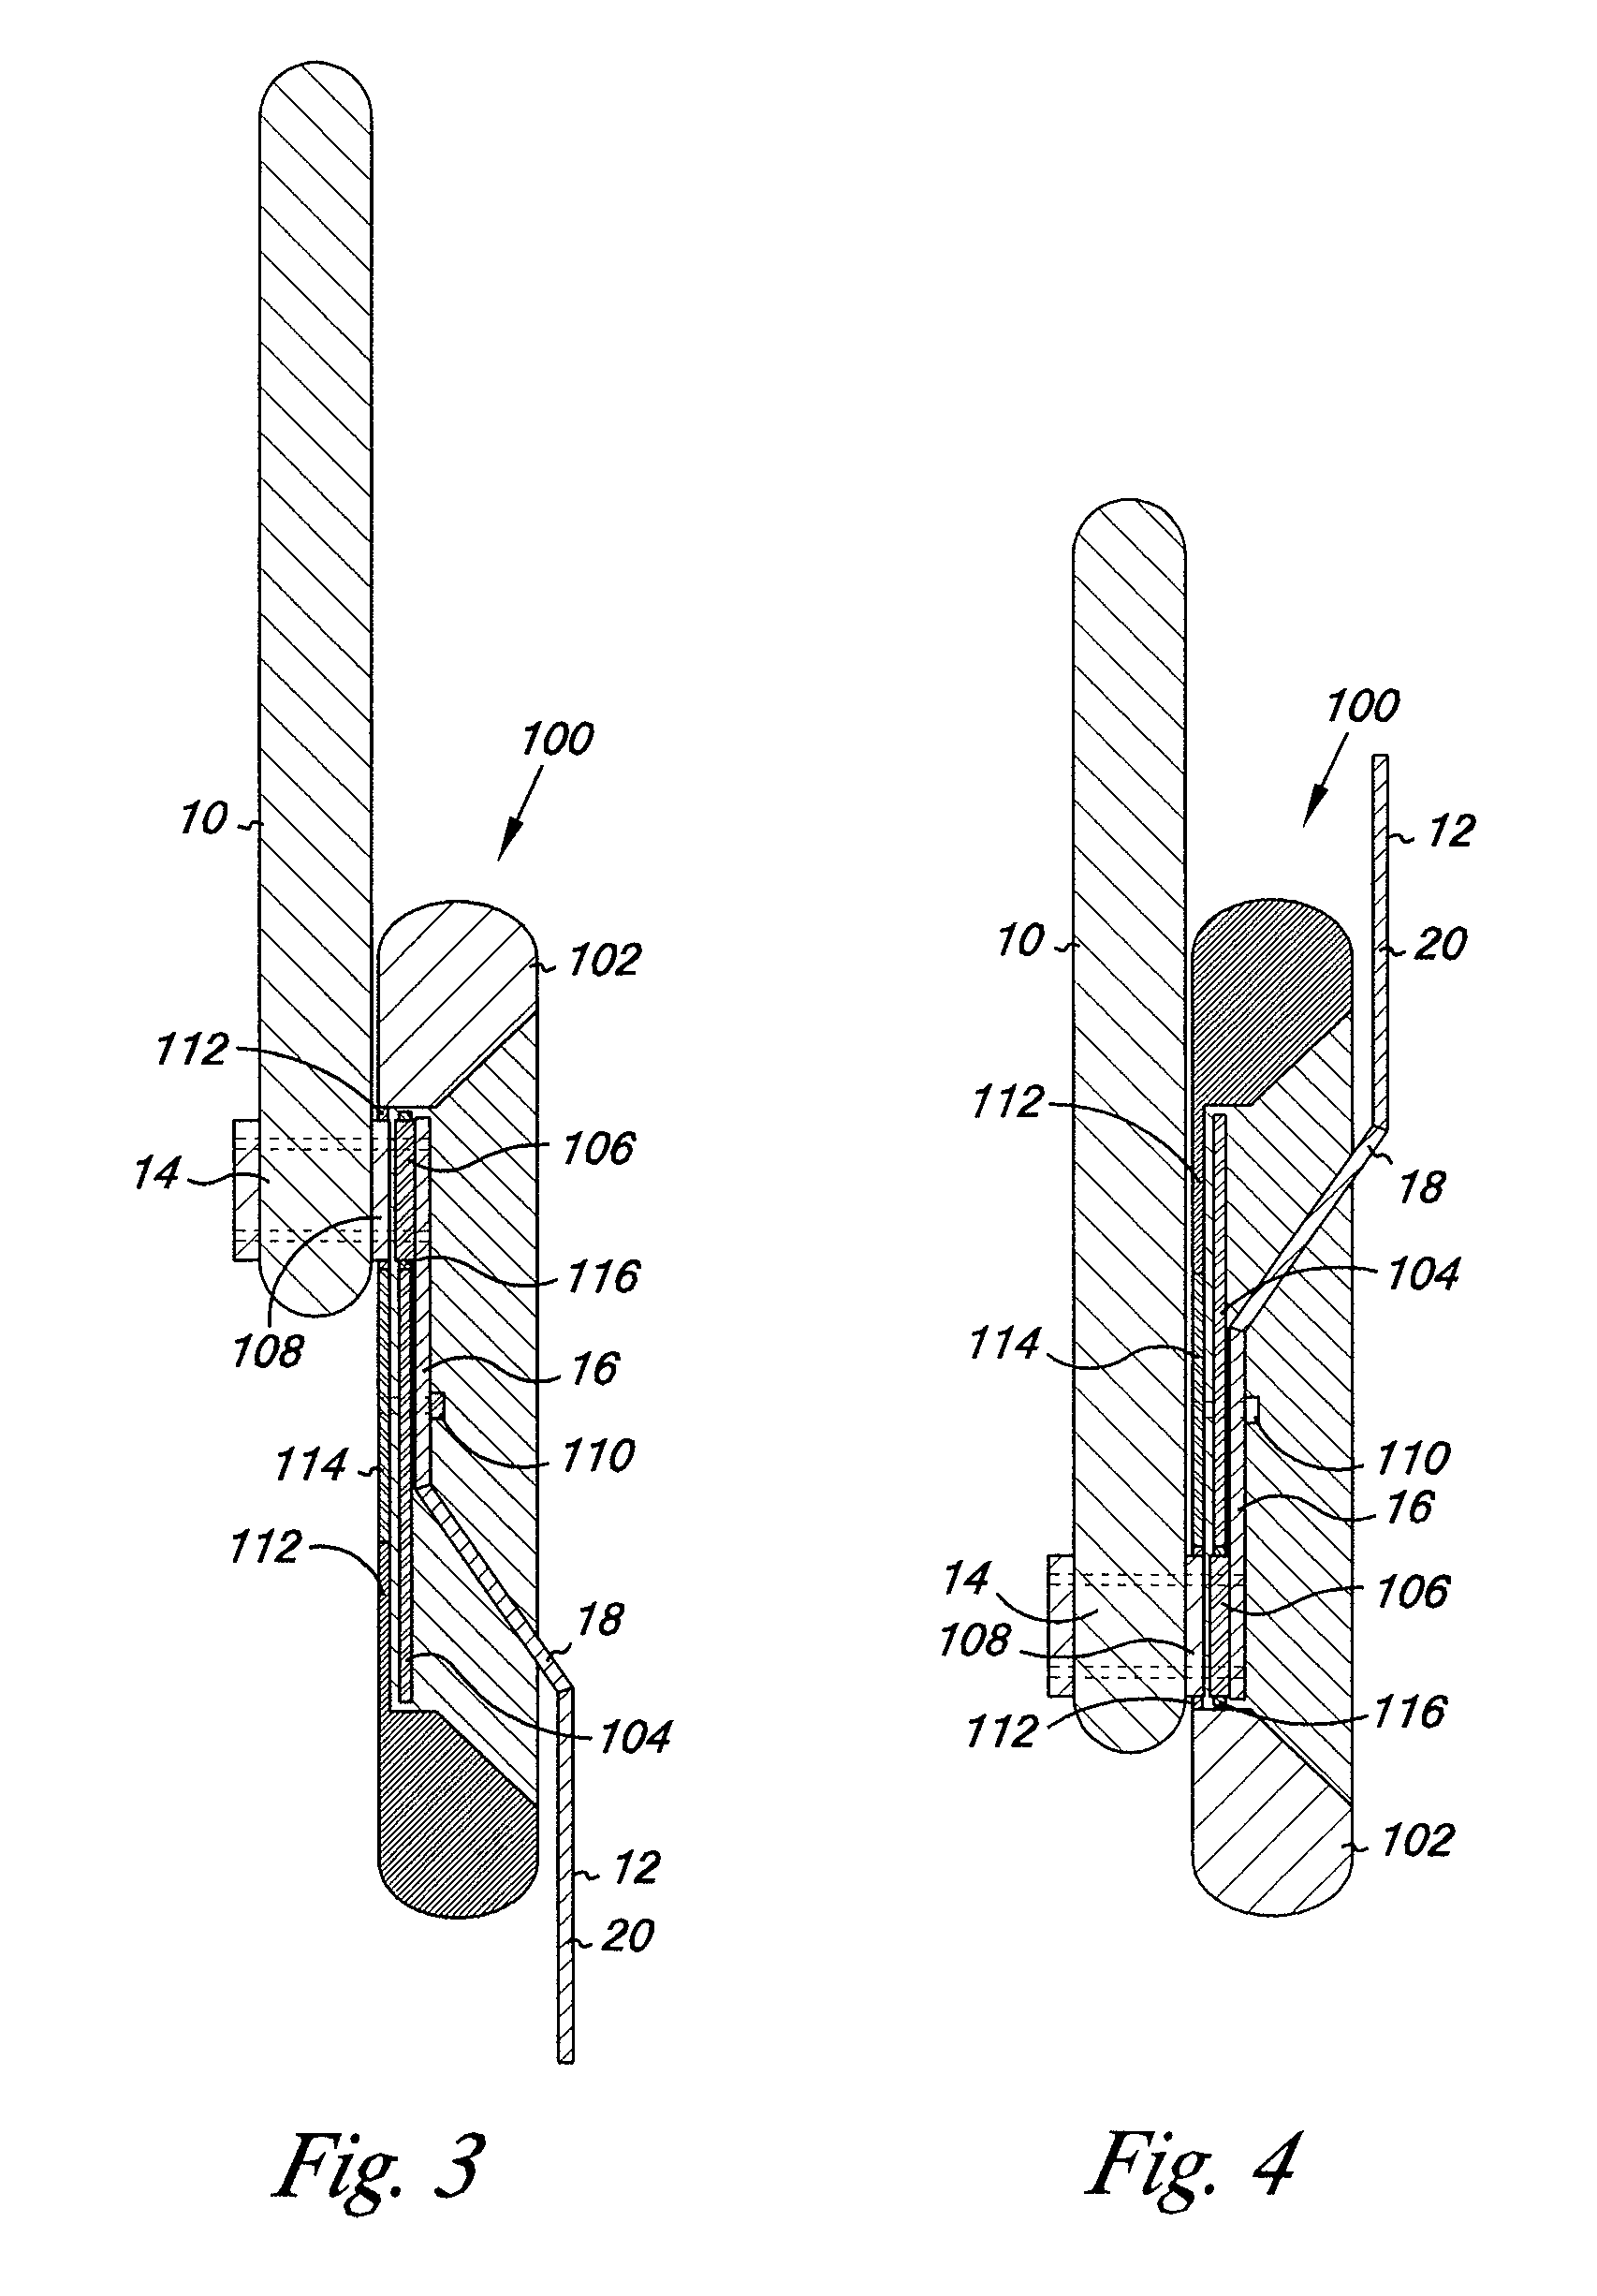 Side rail pad/panel system for patient support apparatus